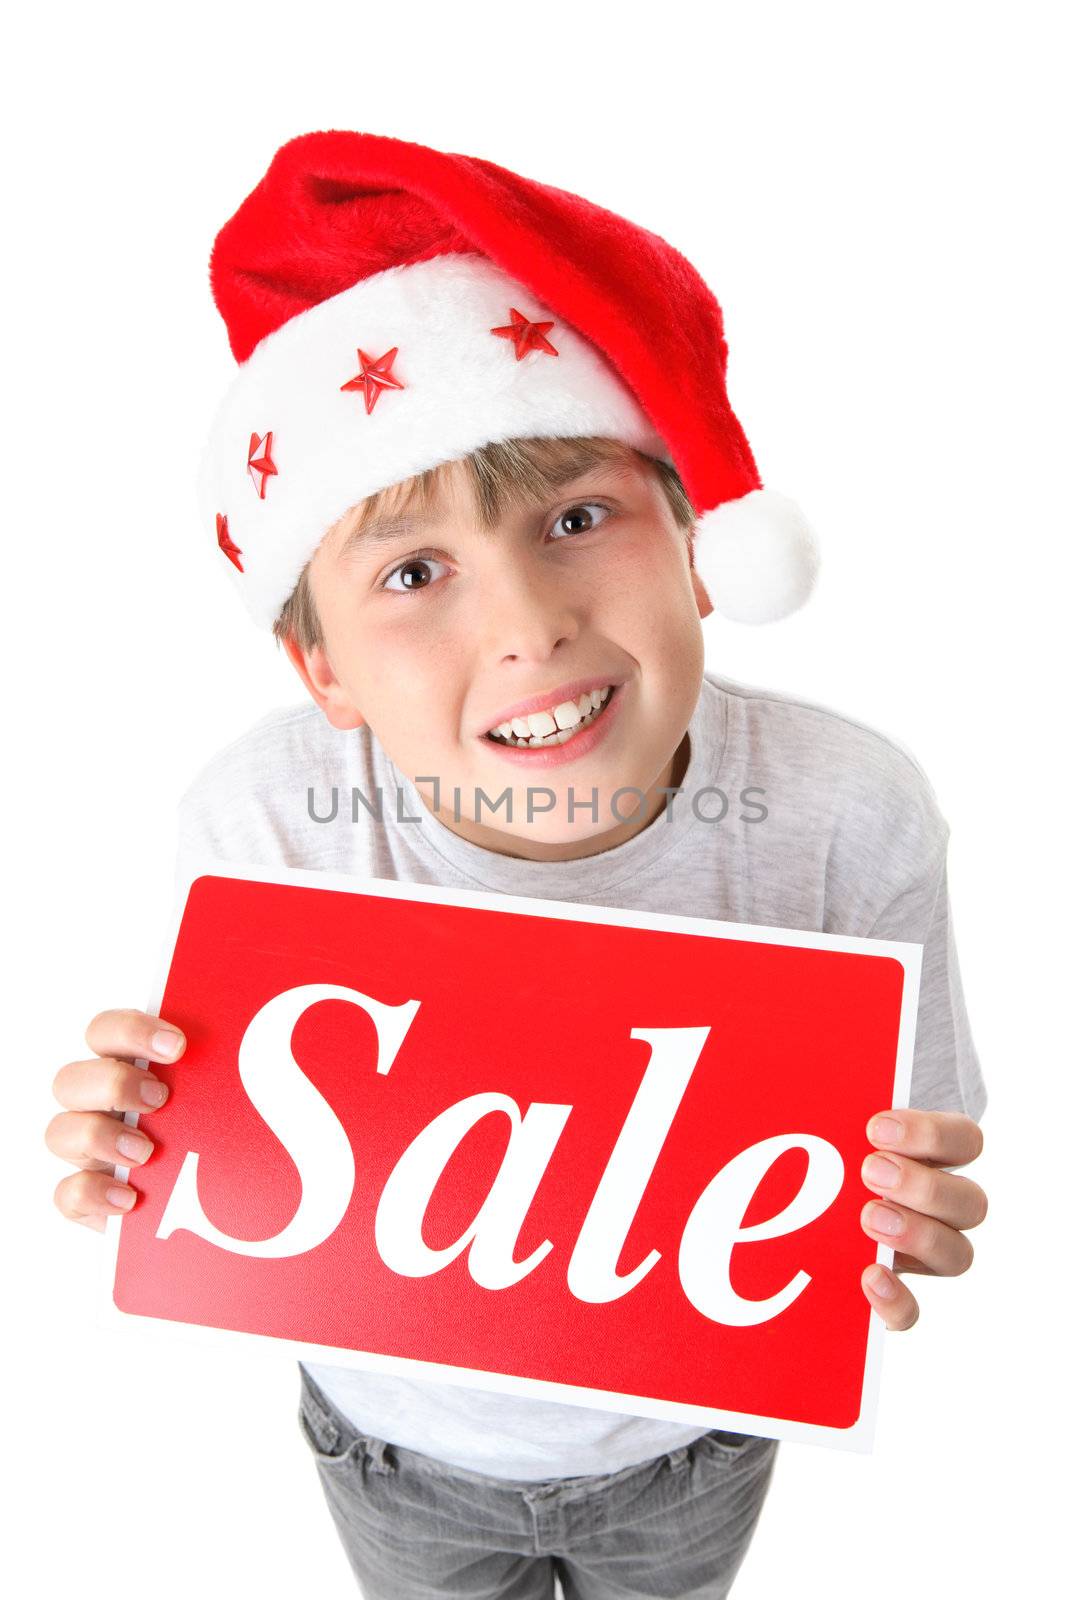 Child holding a retail sale sign and looking up.